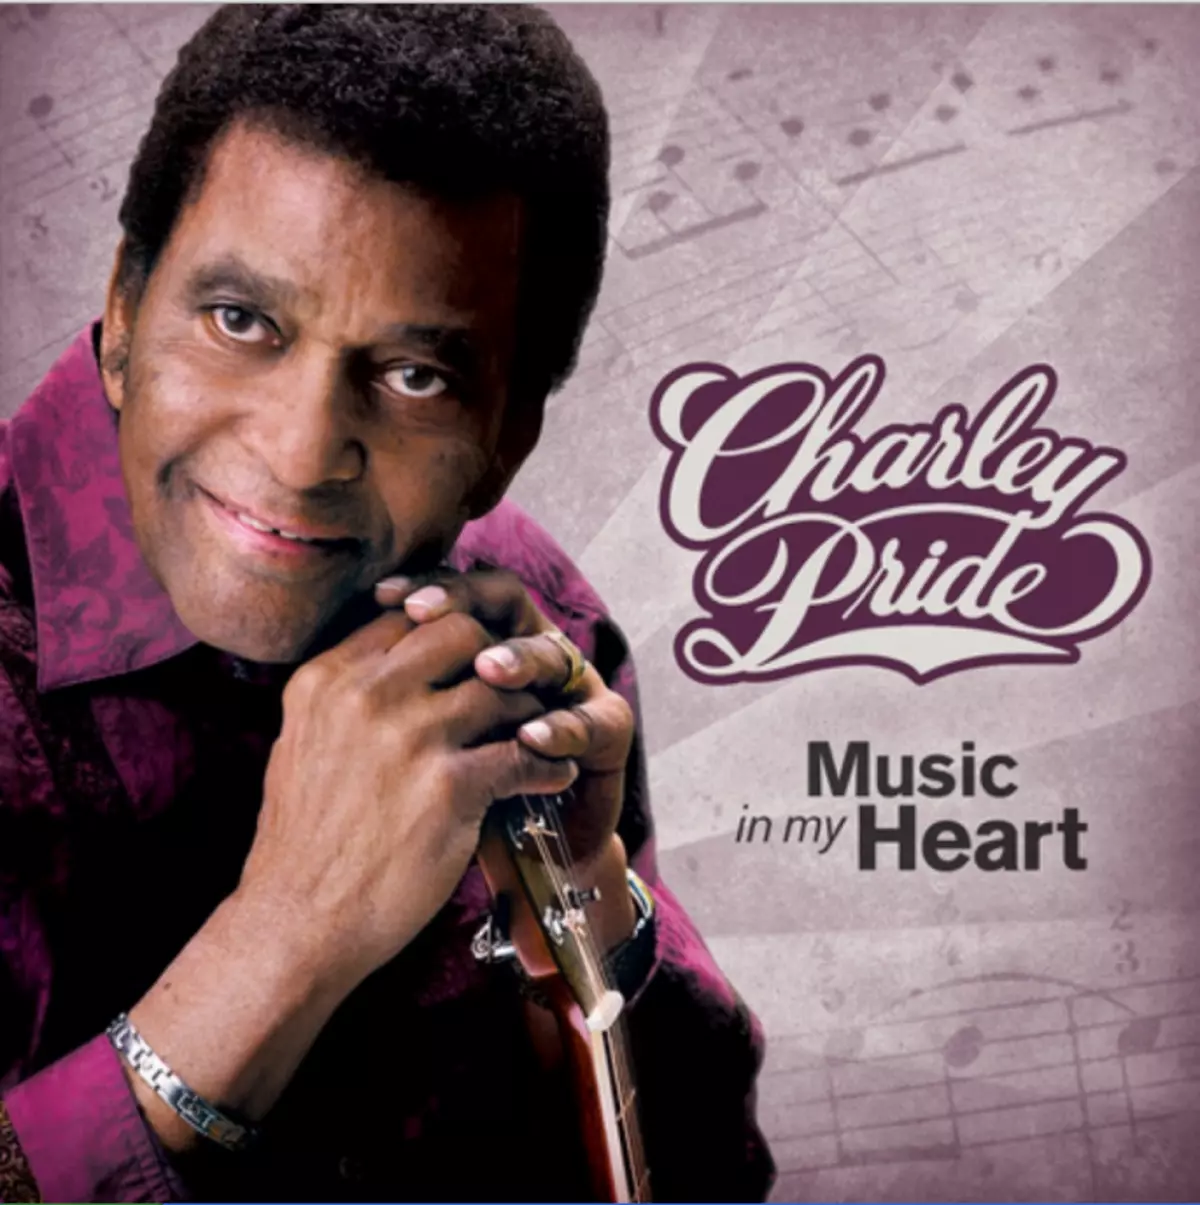 Charley Pride 'Music In My Heart'